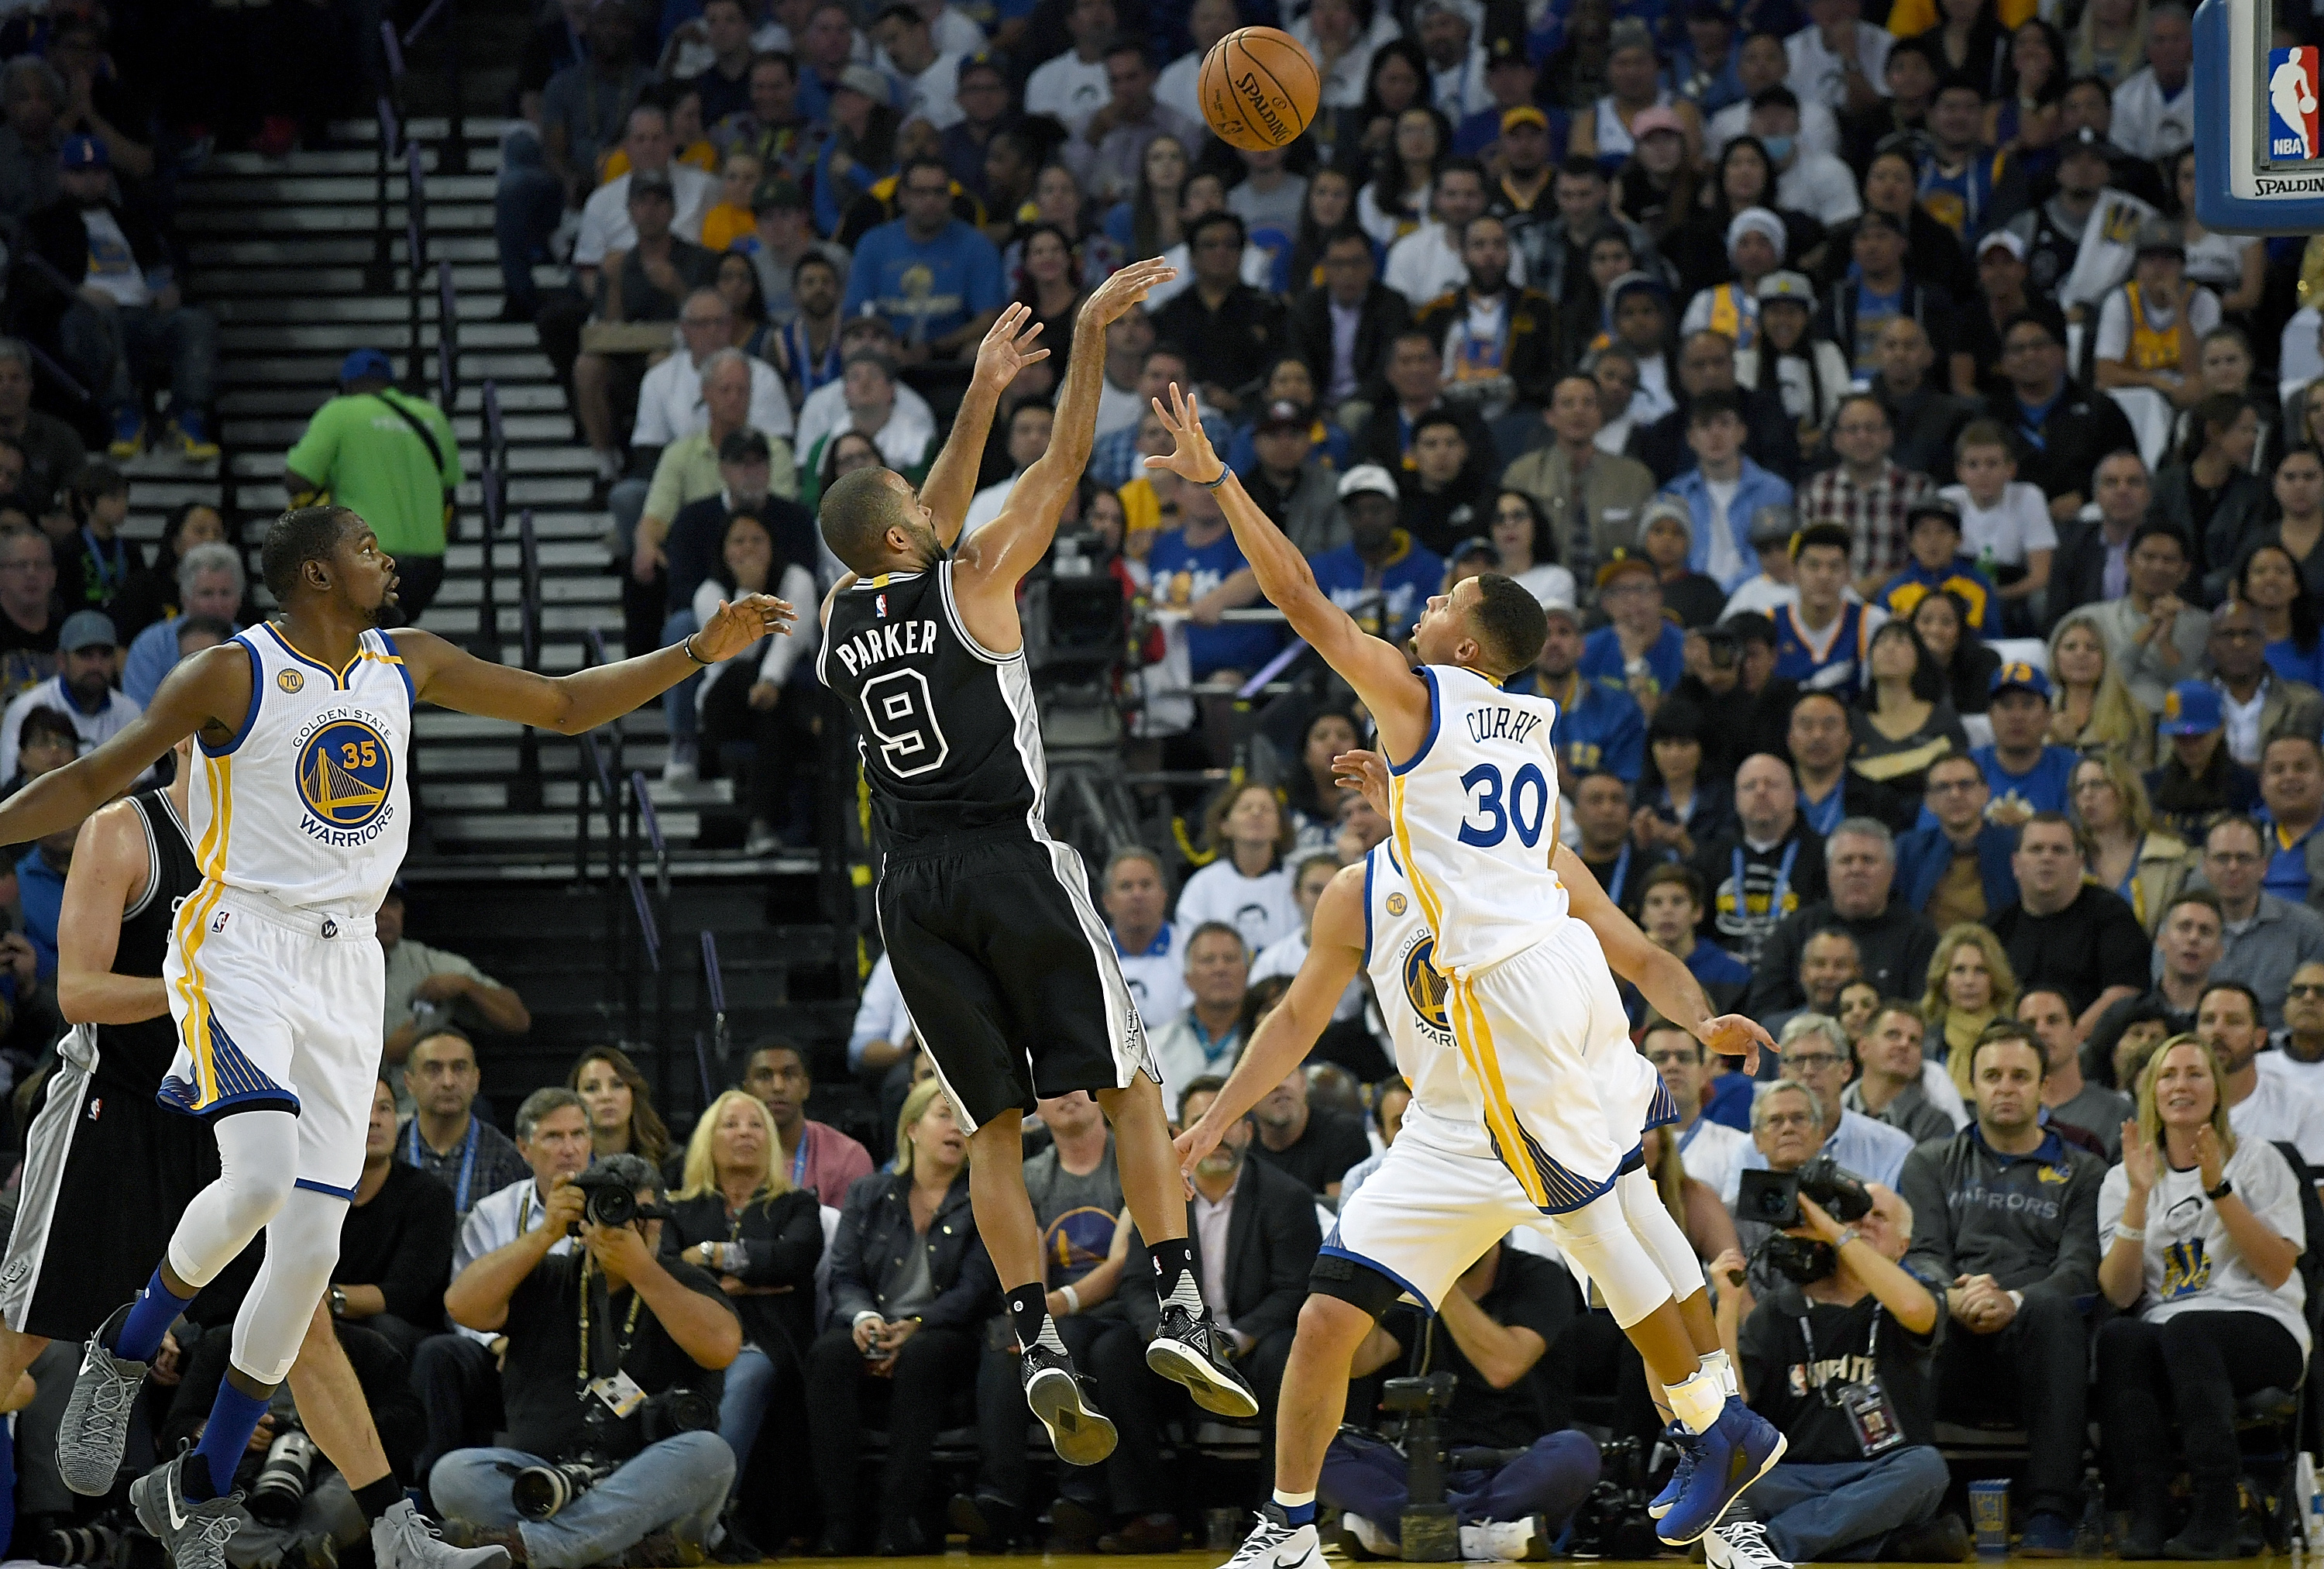 OAKLAND, CA - OCTOBER 25: Tony Parker #9 of the San Antonio Spurs shoots over Stephen Curry #30 of the Golden State Warriors during the first quarter in an NBA basketball game at ORACLE Arena on October 25, 2016 Oakland, California. NOTE TO USER: User expressly acknowledges and agrees that, by downloading and or using this photograph, User is consenting to the terms and conditions of the Getty Images License Agreement.   Thearon W. Henderson/Getty Images/AFP